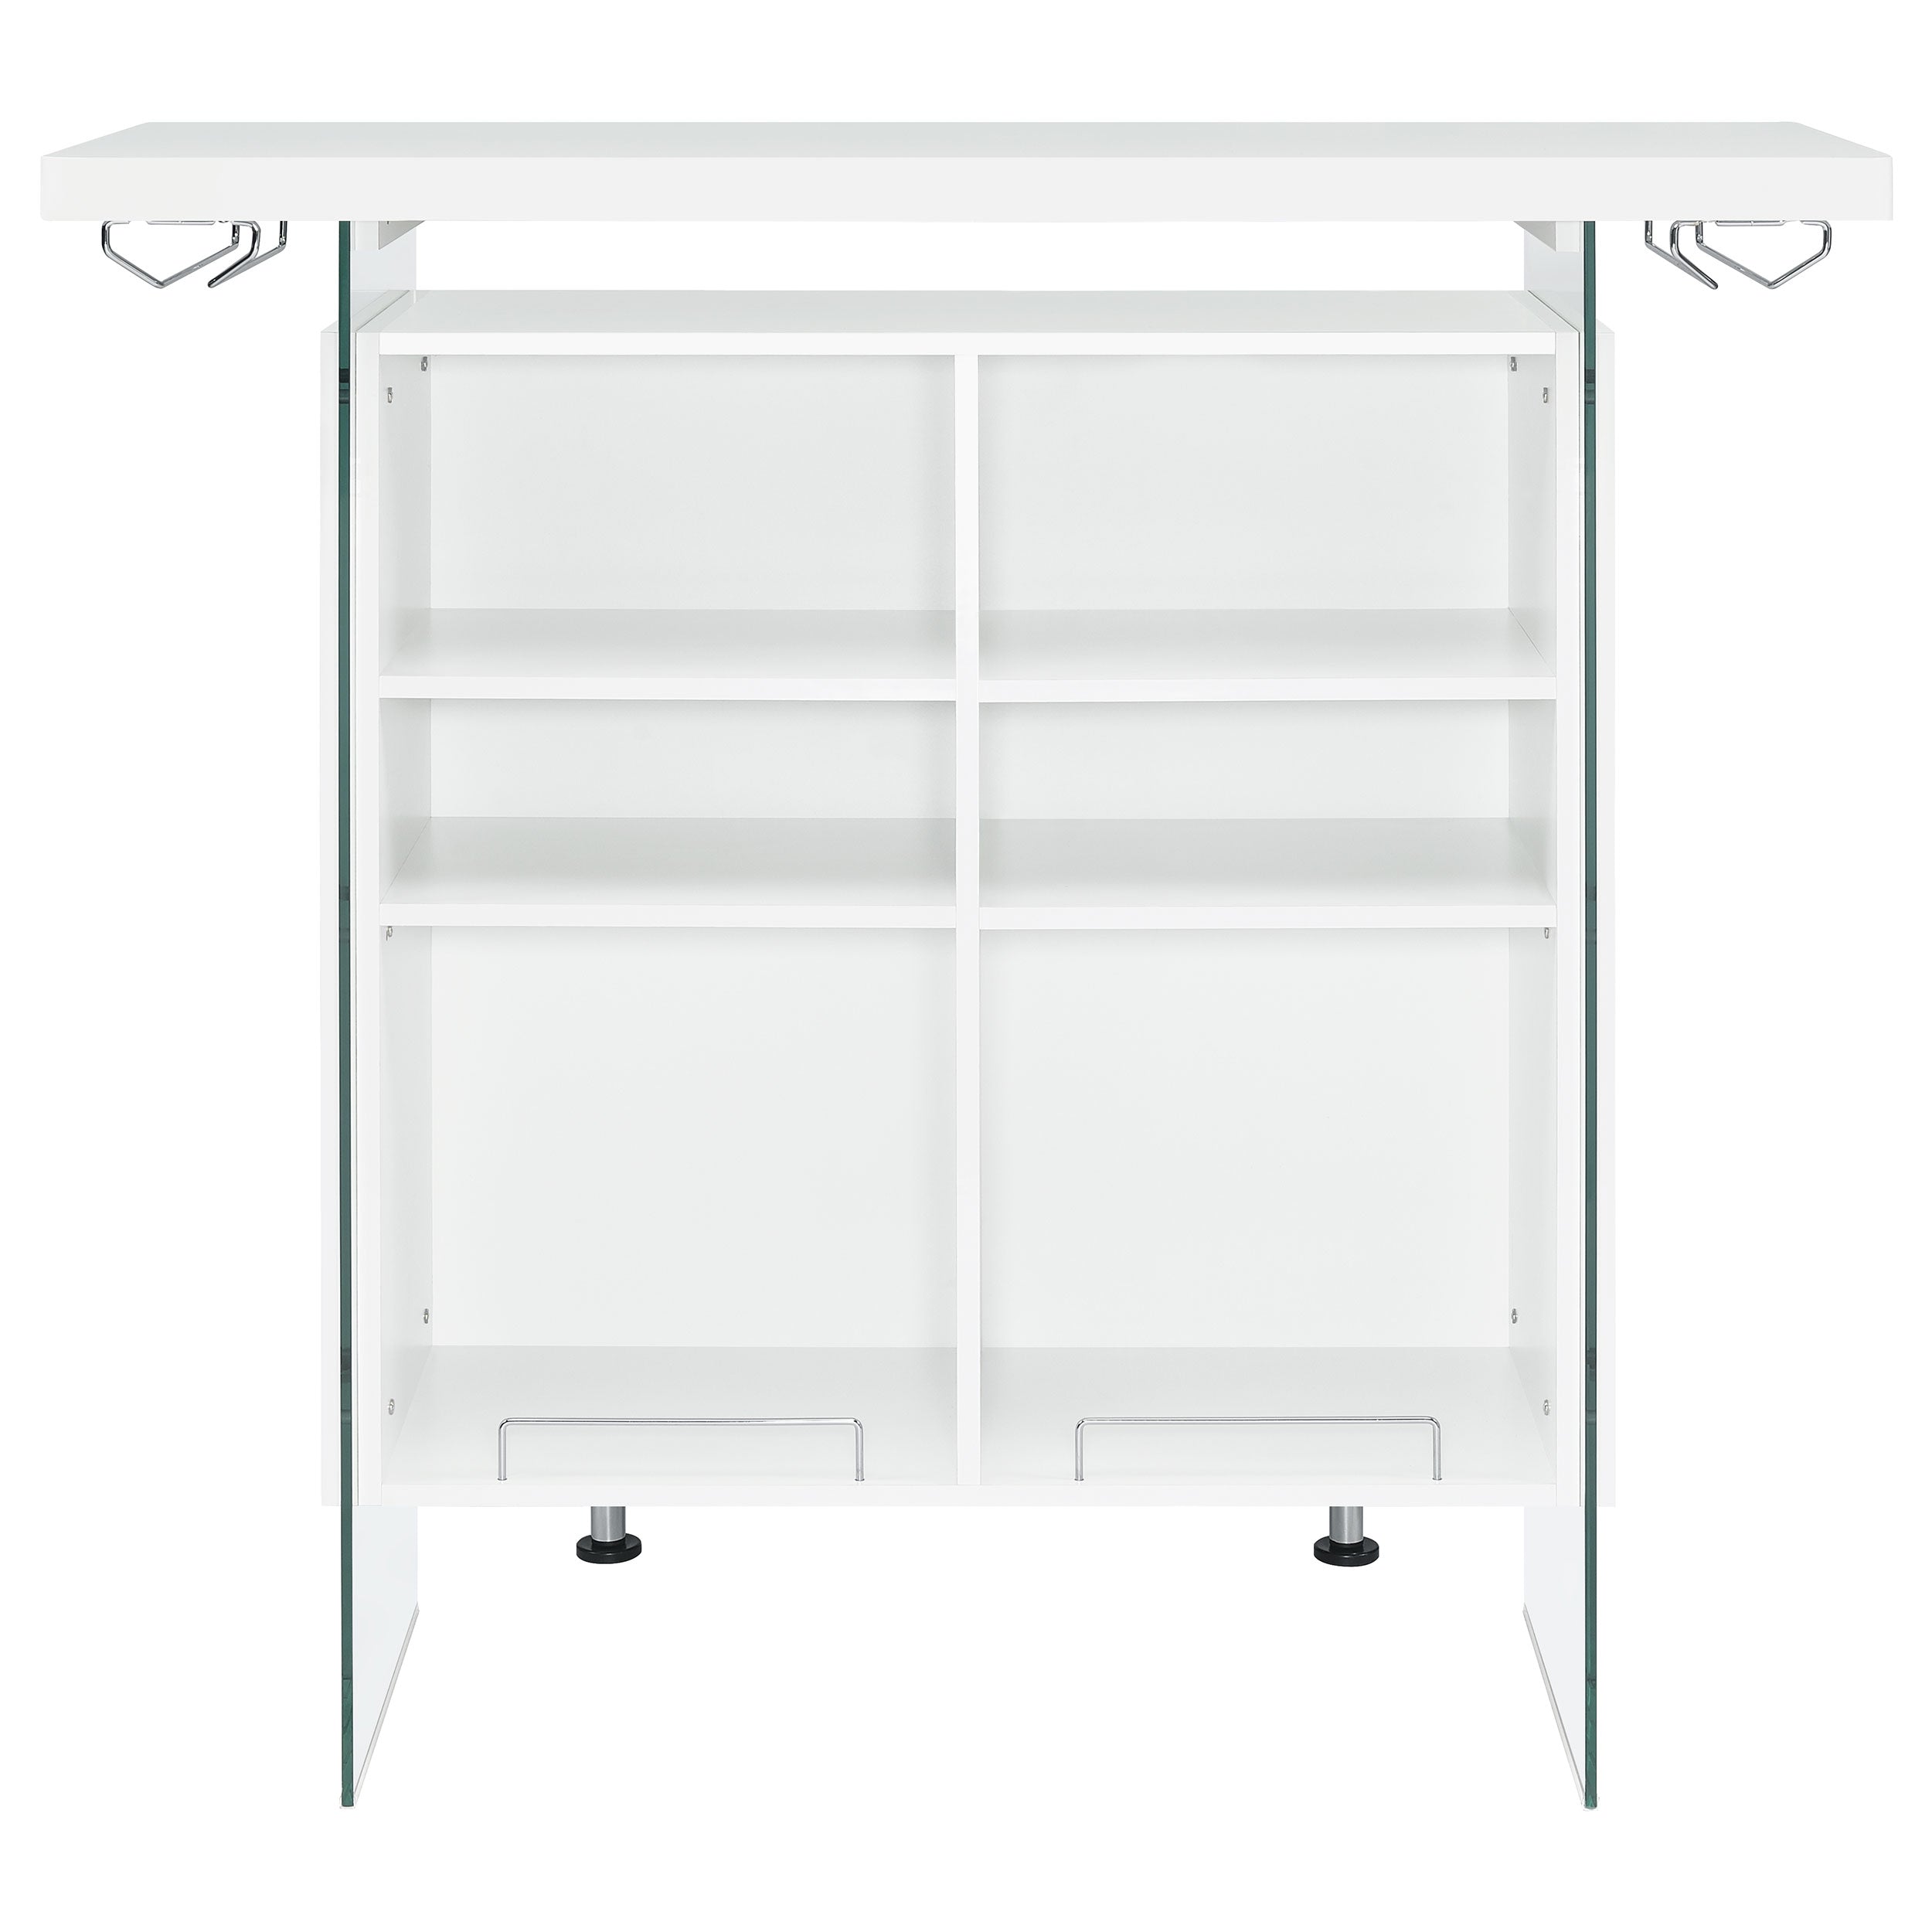 Acosta Rectangular Bar Unit with Footrest and Glass Side Panels Home Bar White